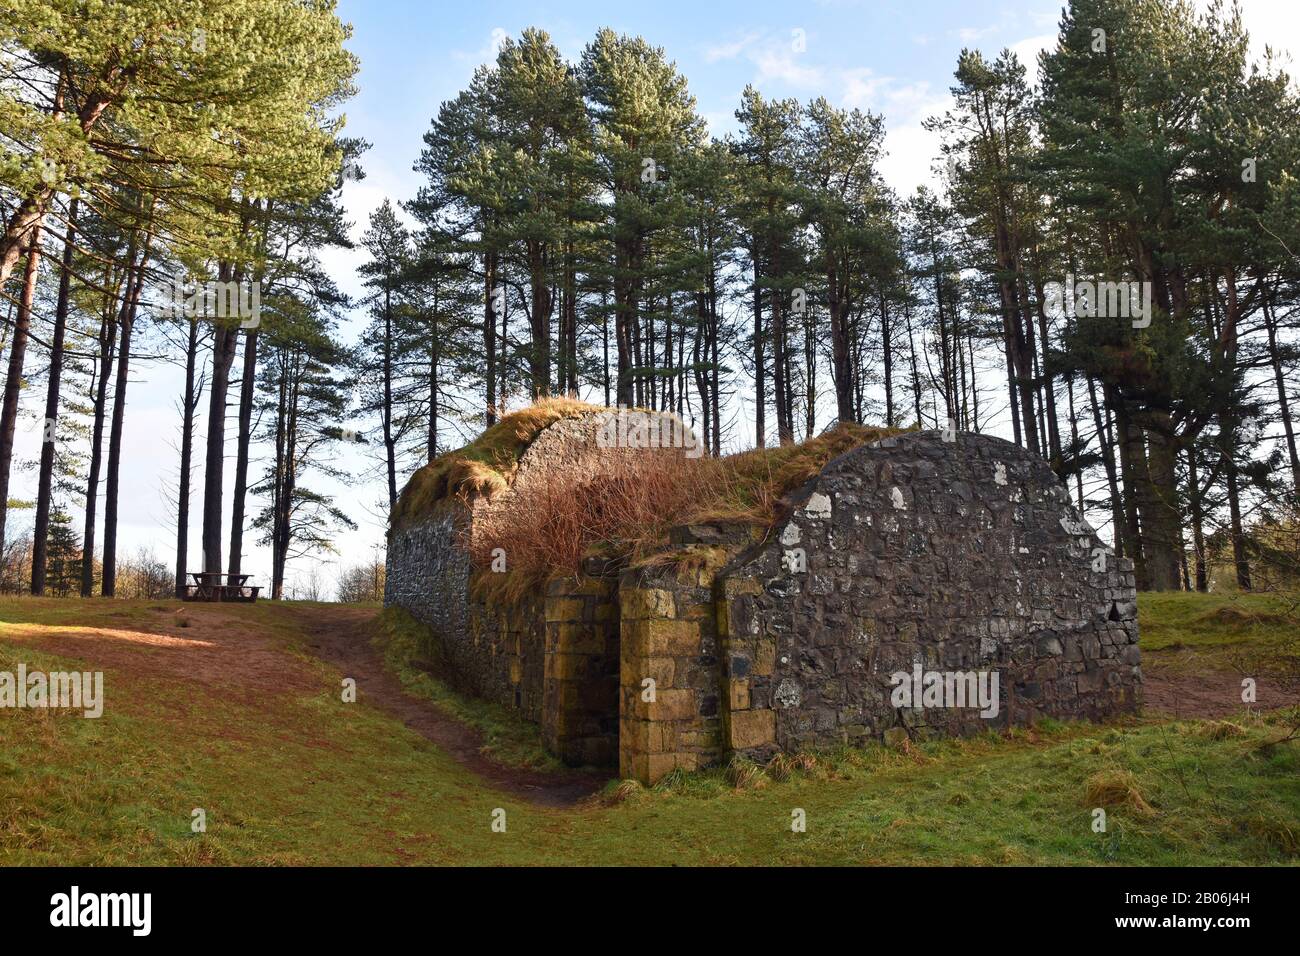 19th Century ice house in Tentsmuir Forest, Fife Scotland, UK. On the route of the Fife Coastal Path. Now colonised by bats. Stock Photo